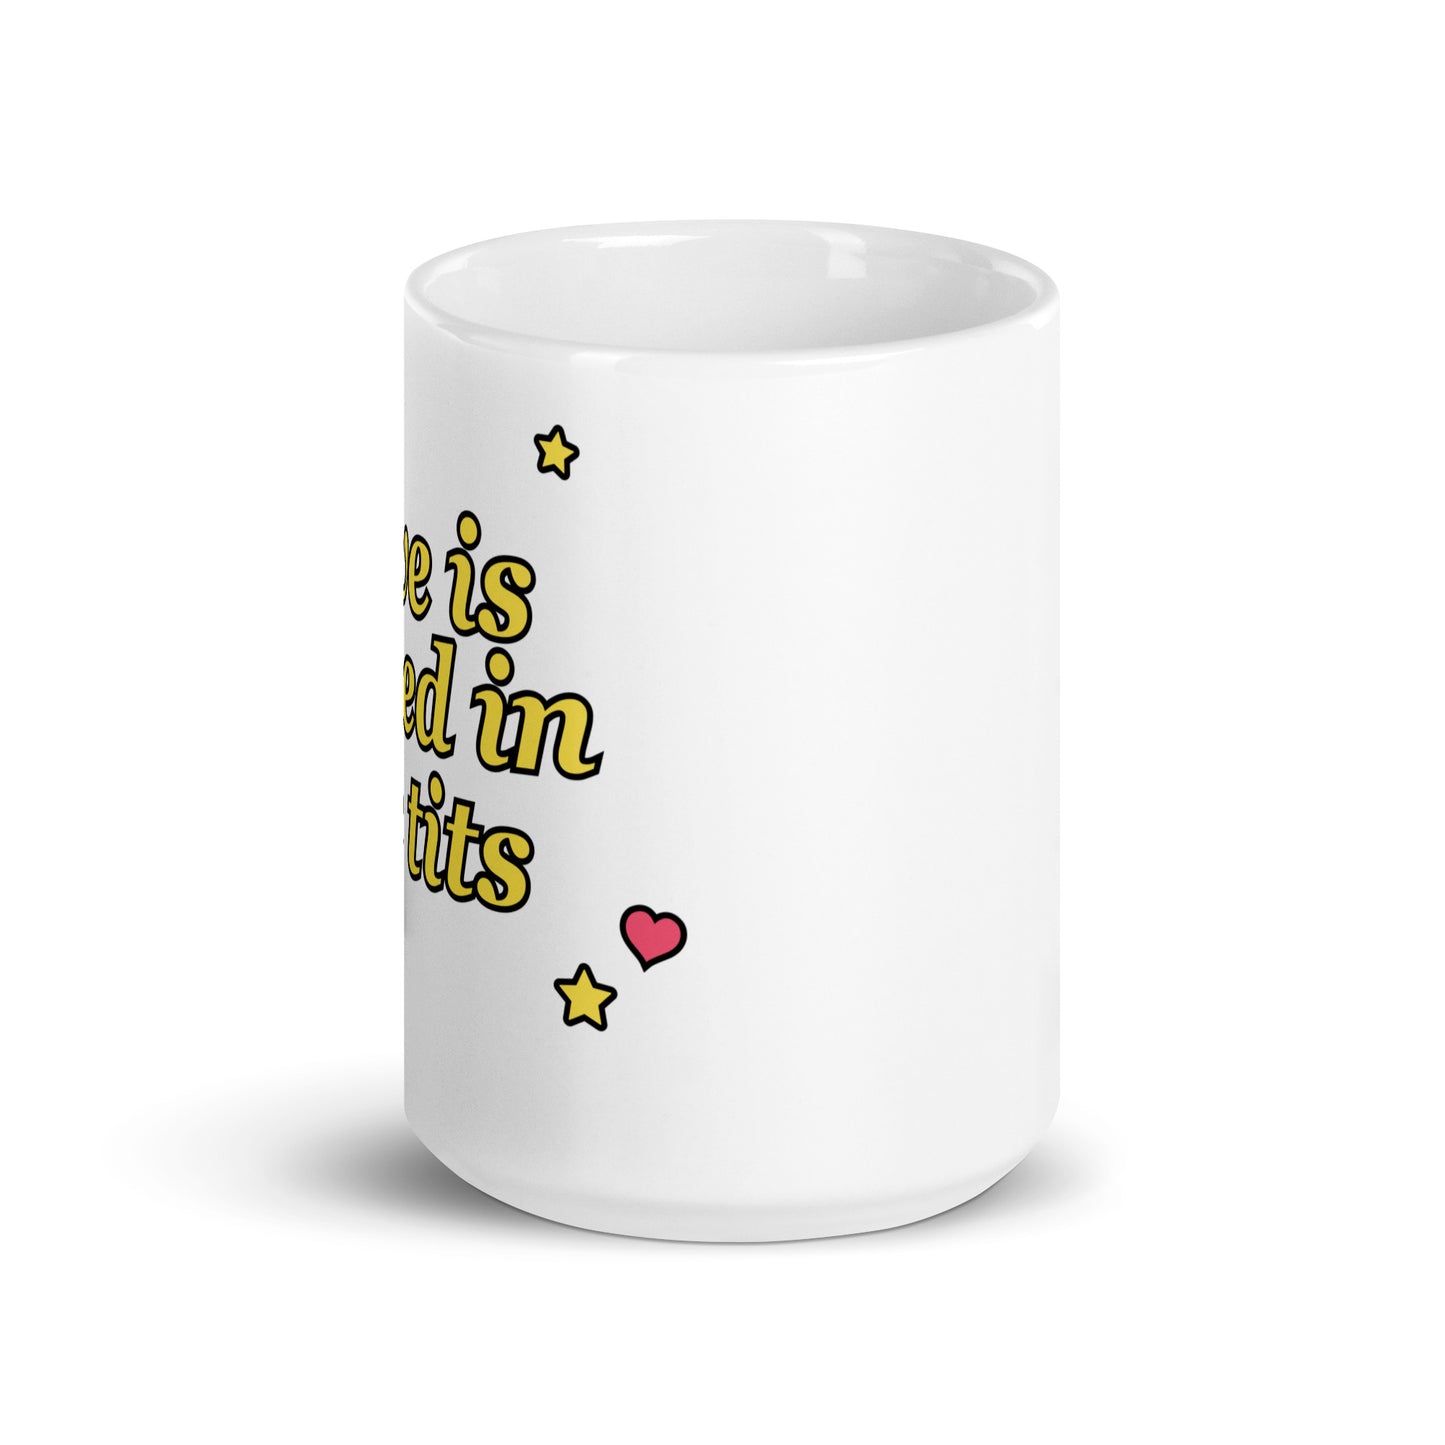 Love is Stored in the Tits mug